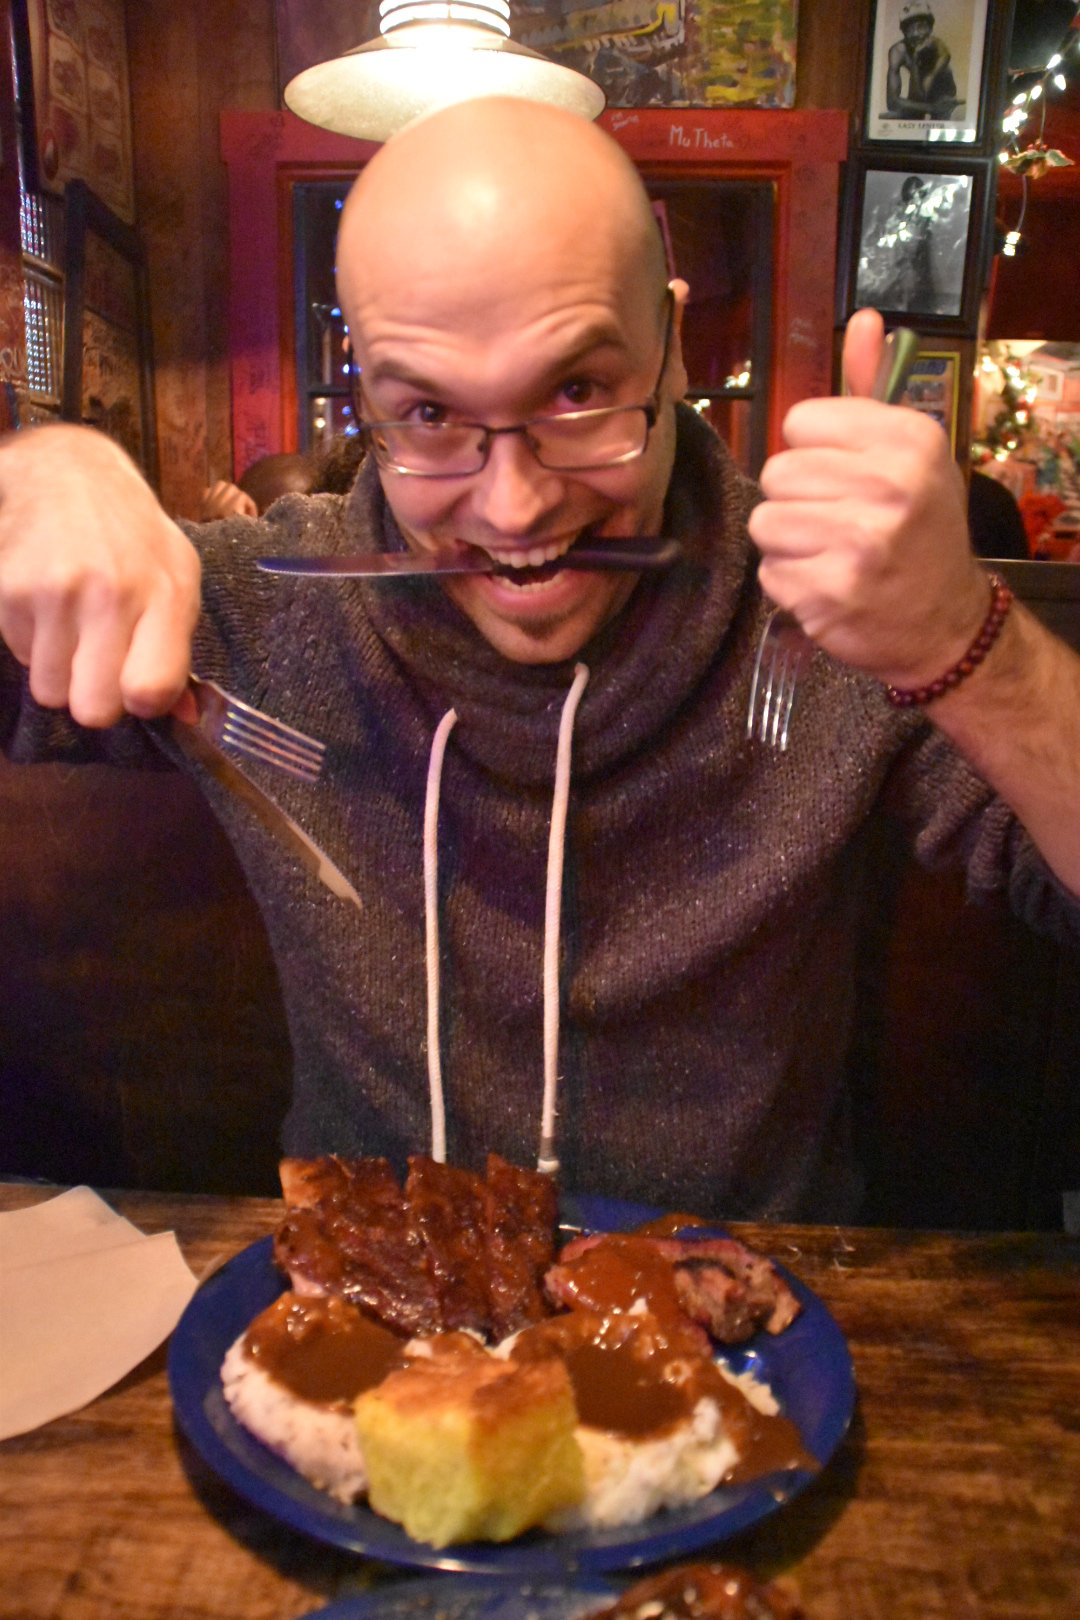 A 30-something year-old man is holding one fork in each hand and a knife between his teeth, smiling in front of a blue dish with mashed potatoes with a brown sauce, a piece of corn bread, half a rack of ribs and some brisket.